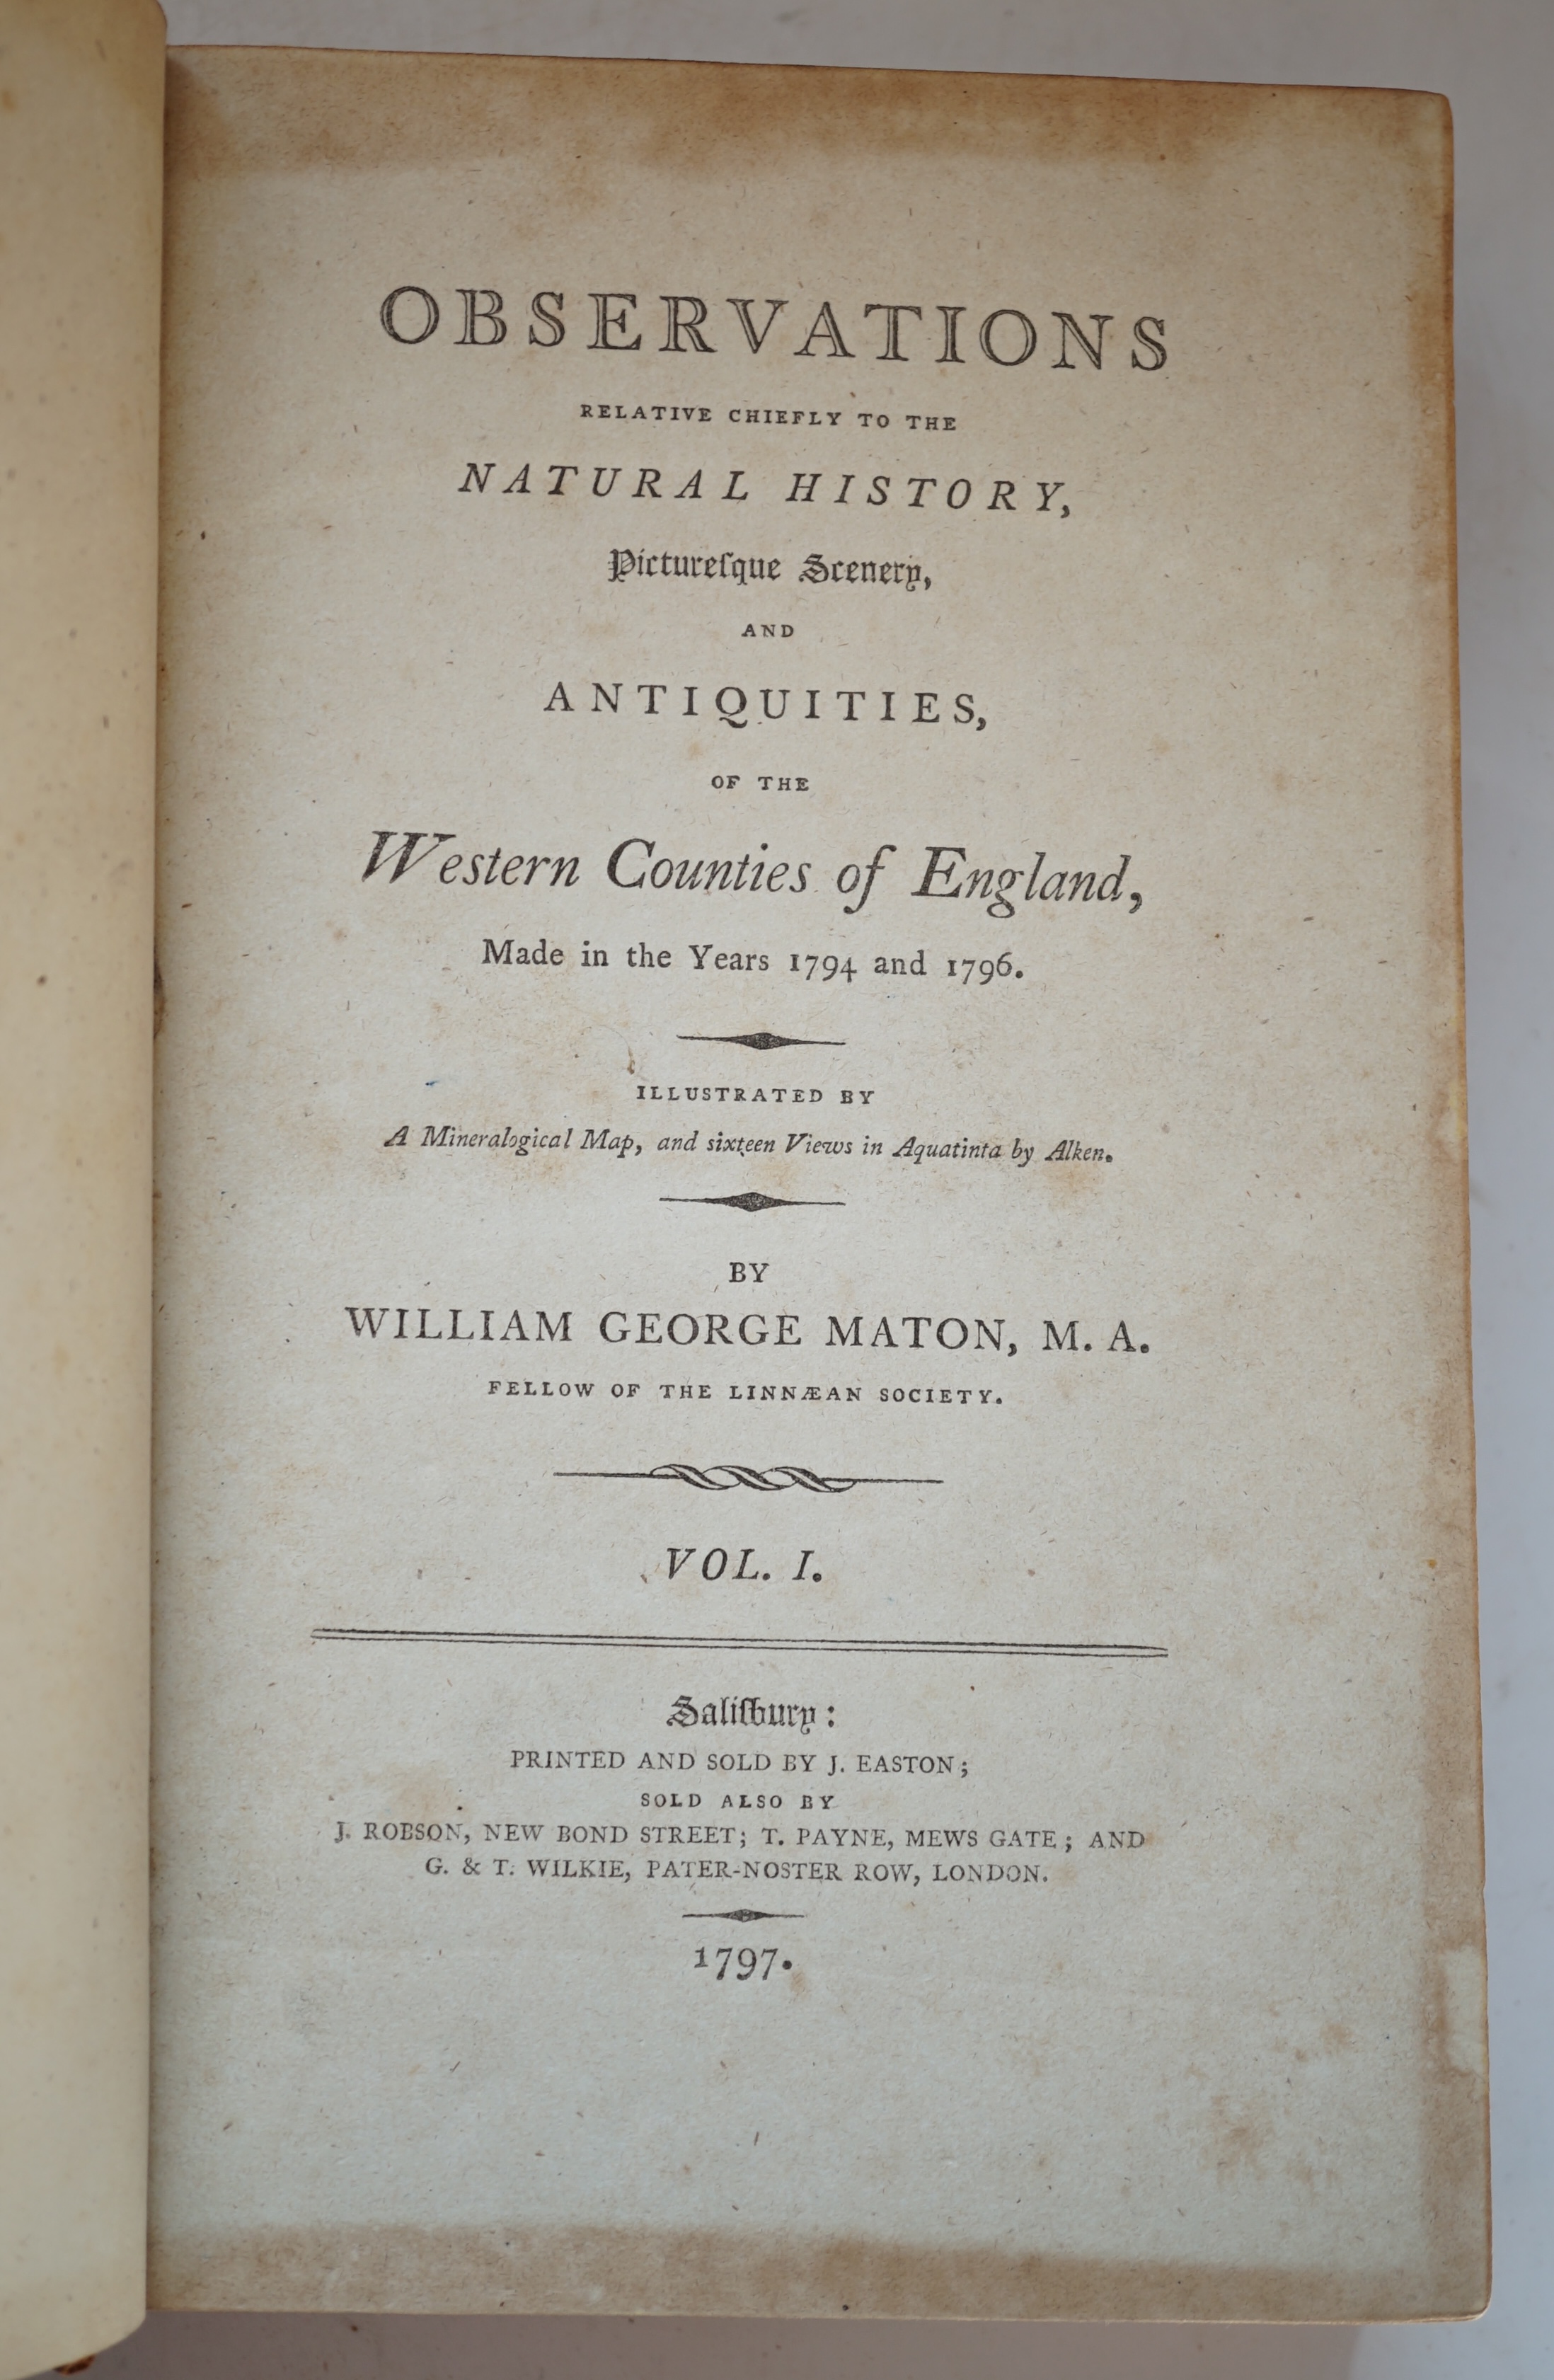 Maton, William George - Observations Relative Chiefly to the Natural History, Picturesque Scenery, and Antiquities of the Western Counties of England, Made in the Years 1794 and 1796, 2 vols. in one, 8vo, calf, front boa